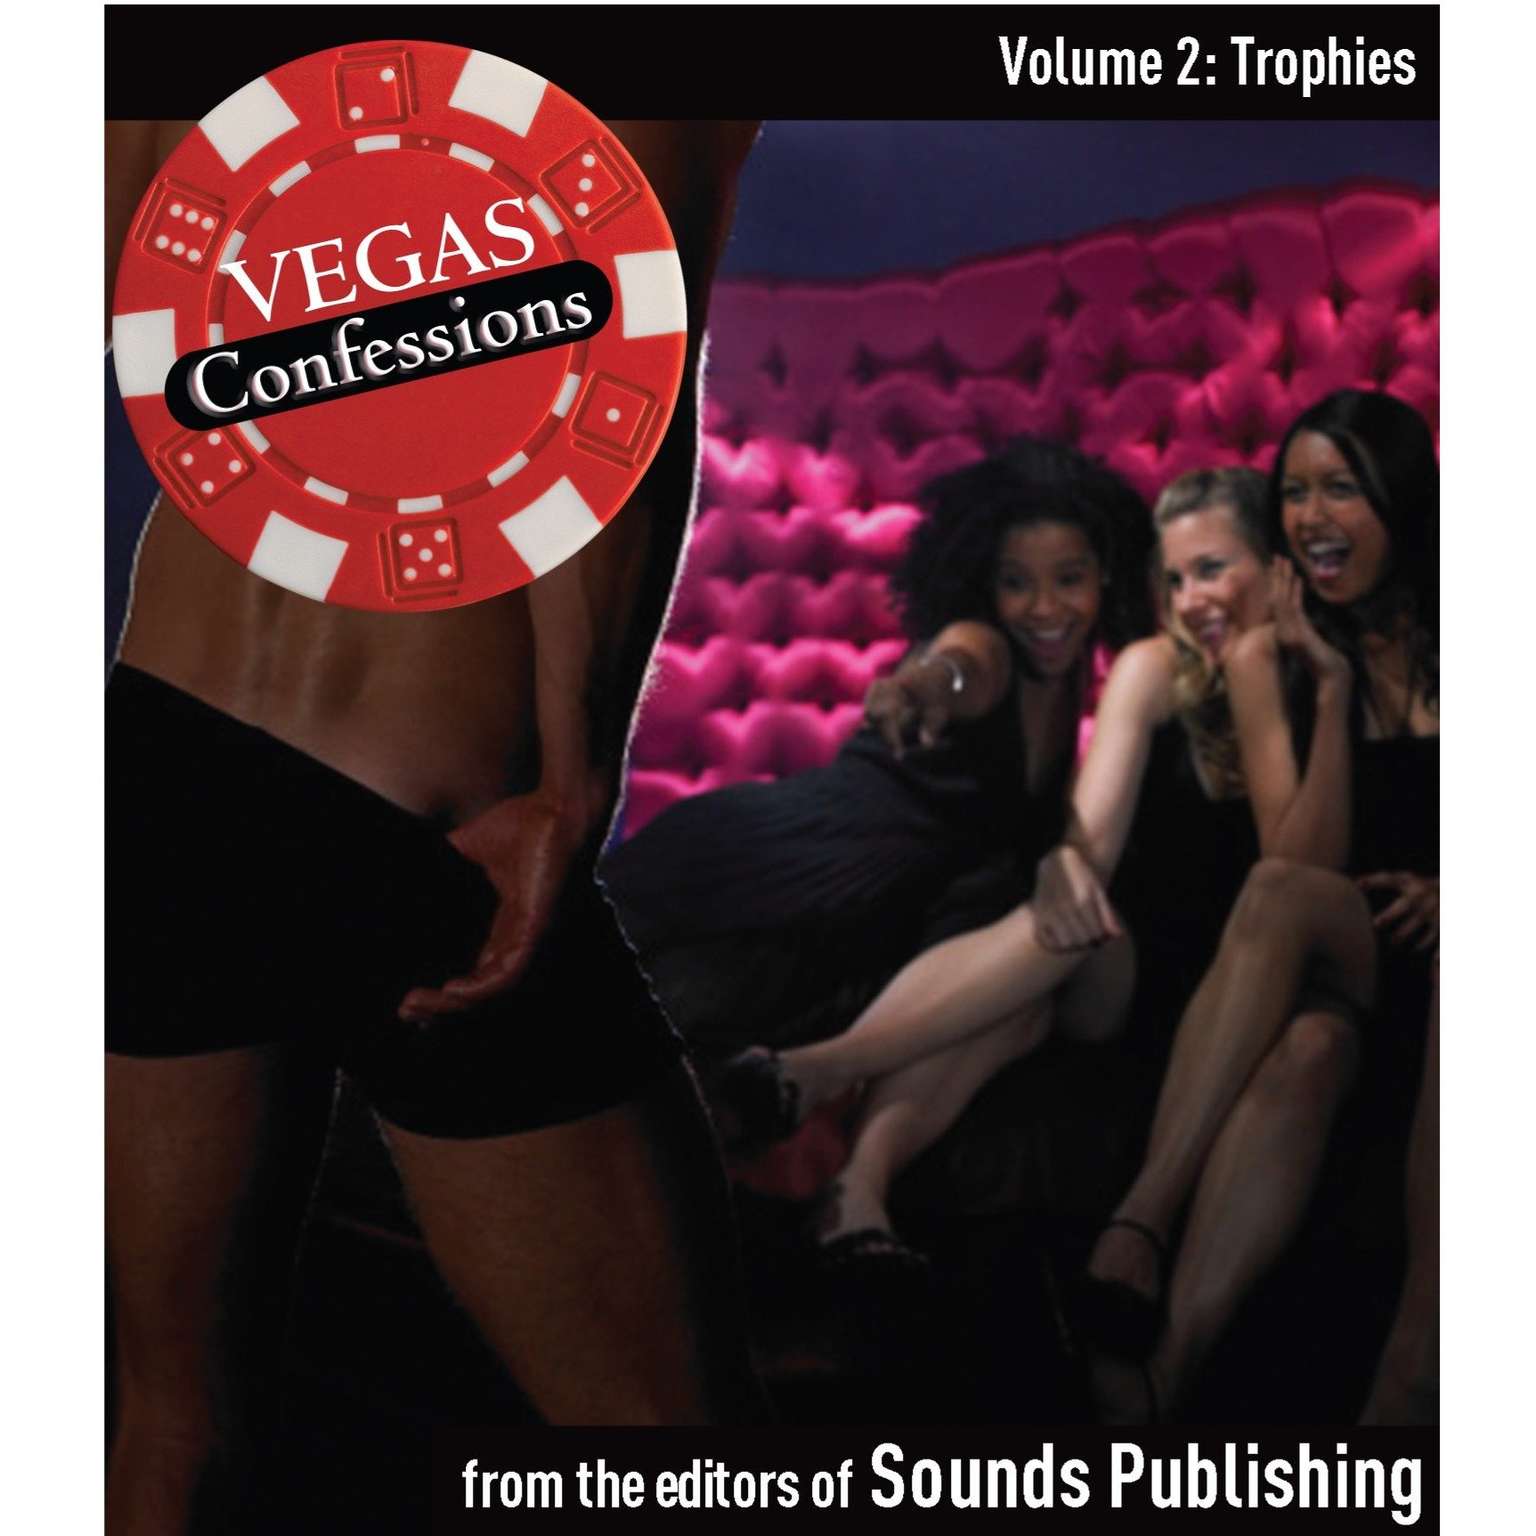 Vegas Confessions 2: Trophies Audiobook, by The Editors of Sounds Publishing